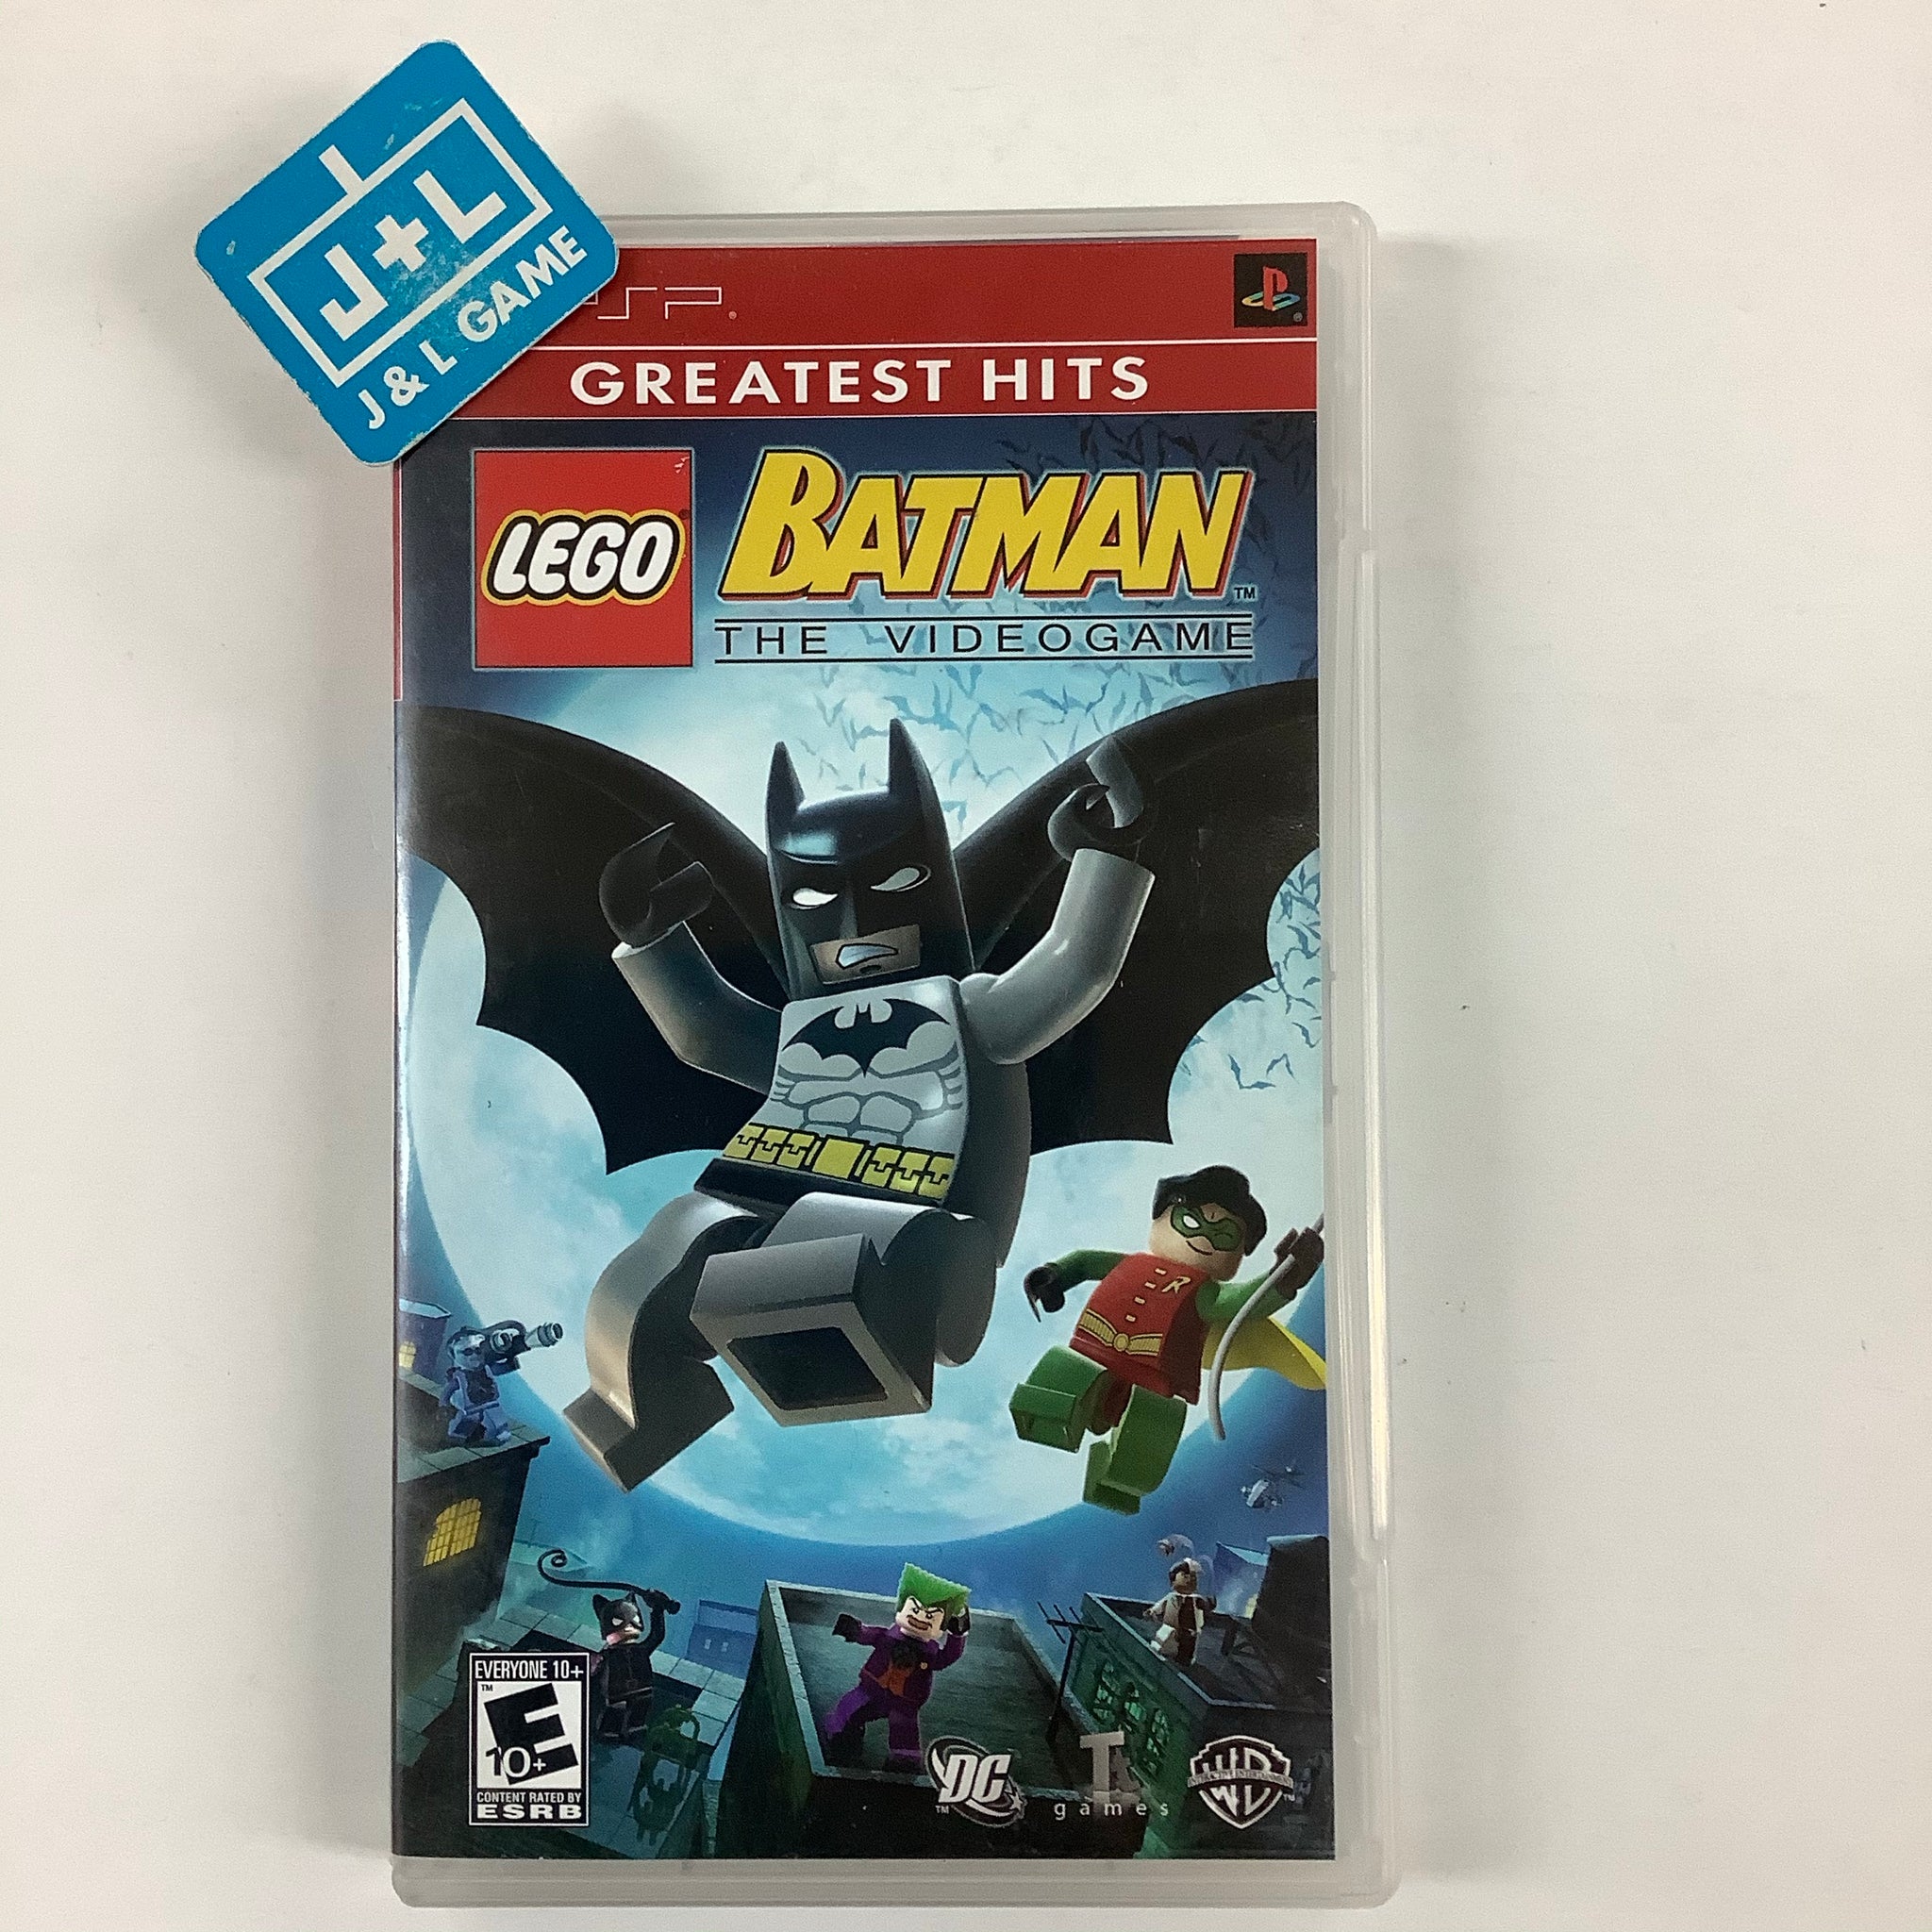 LEGO Batman: The Videogame (Greatest Hits) - Sony PSP [Pre-Owned] – J&L Video Games New City